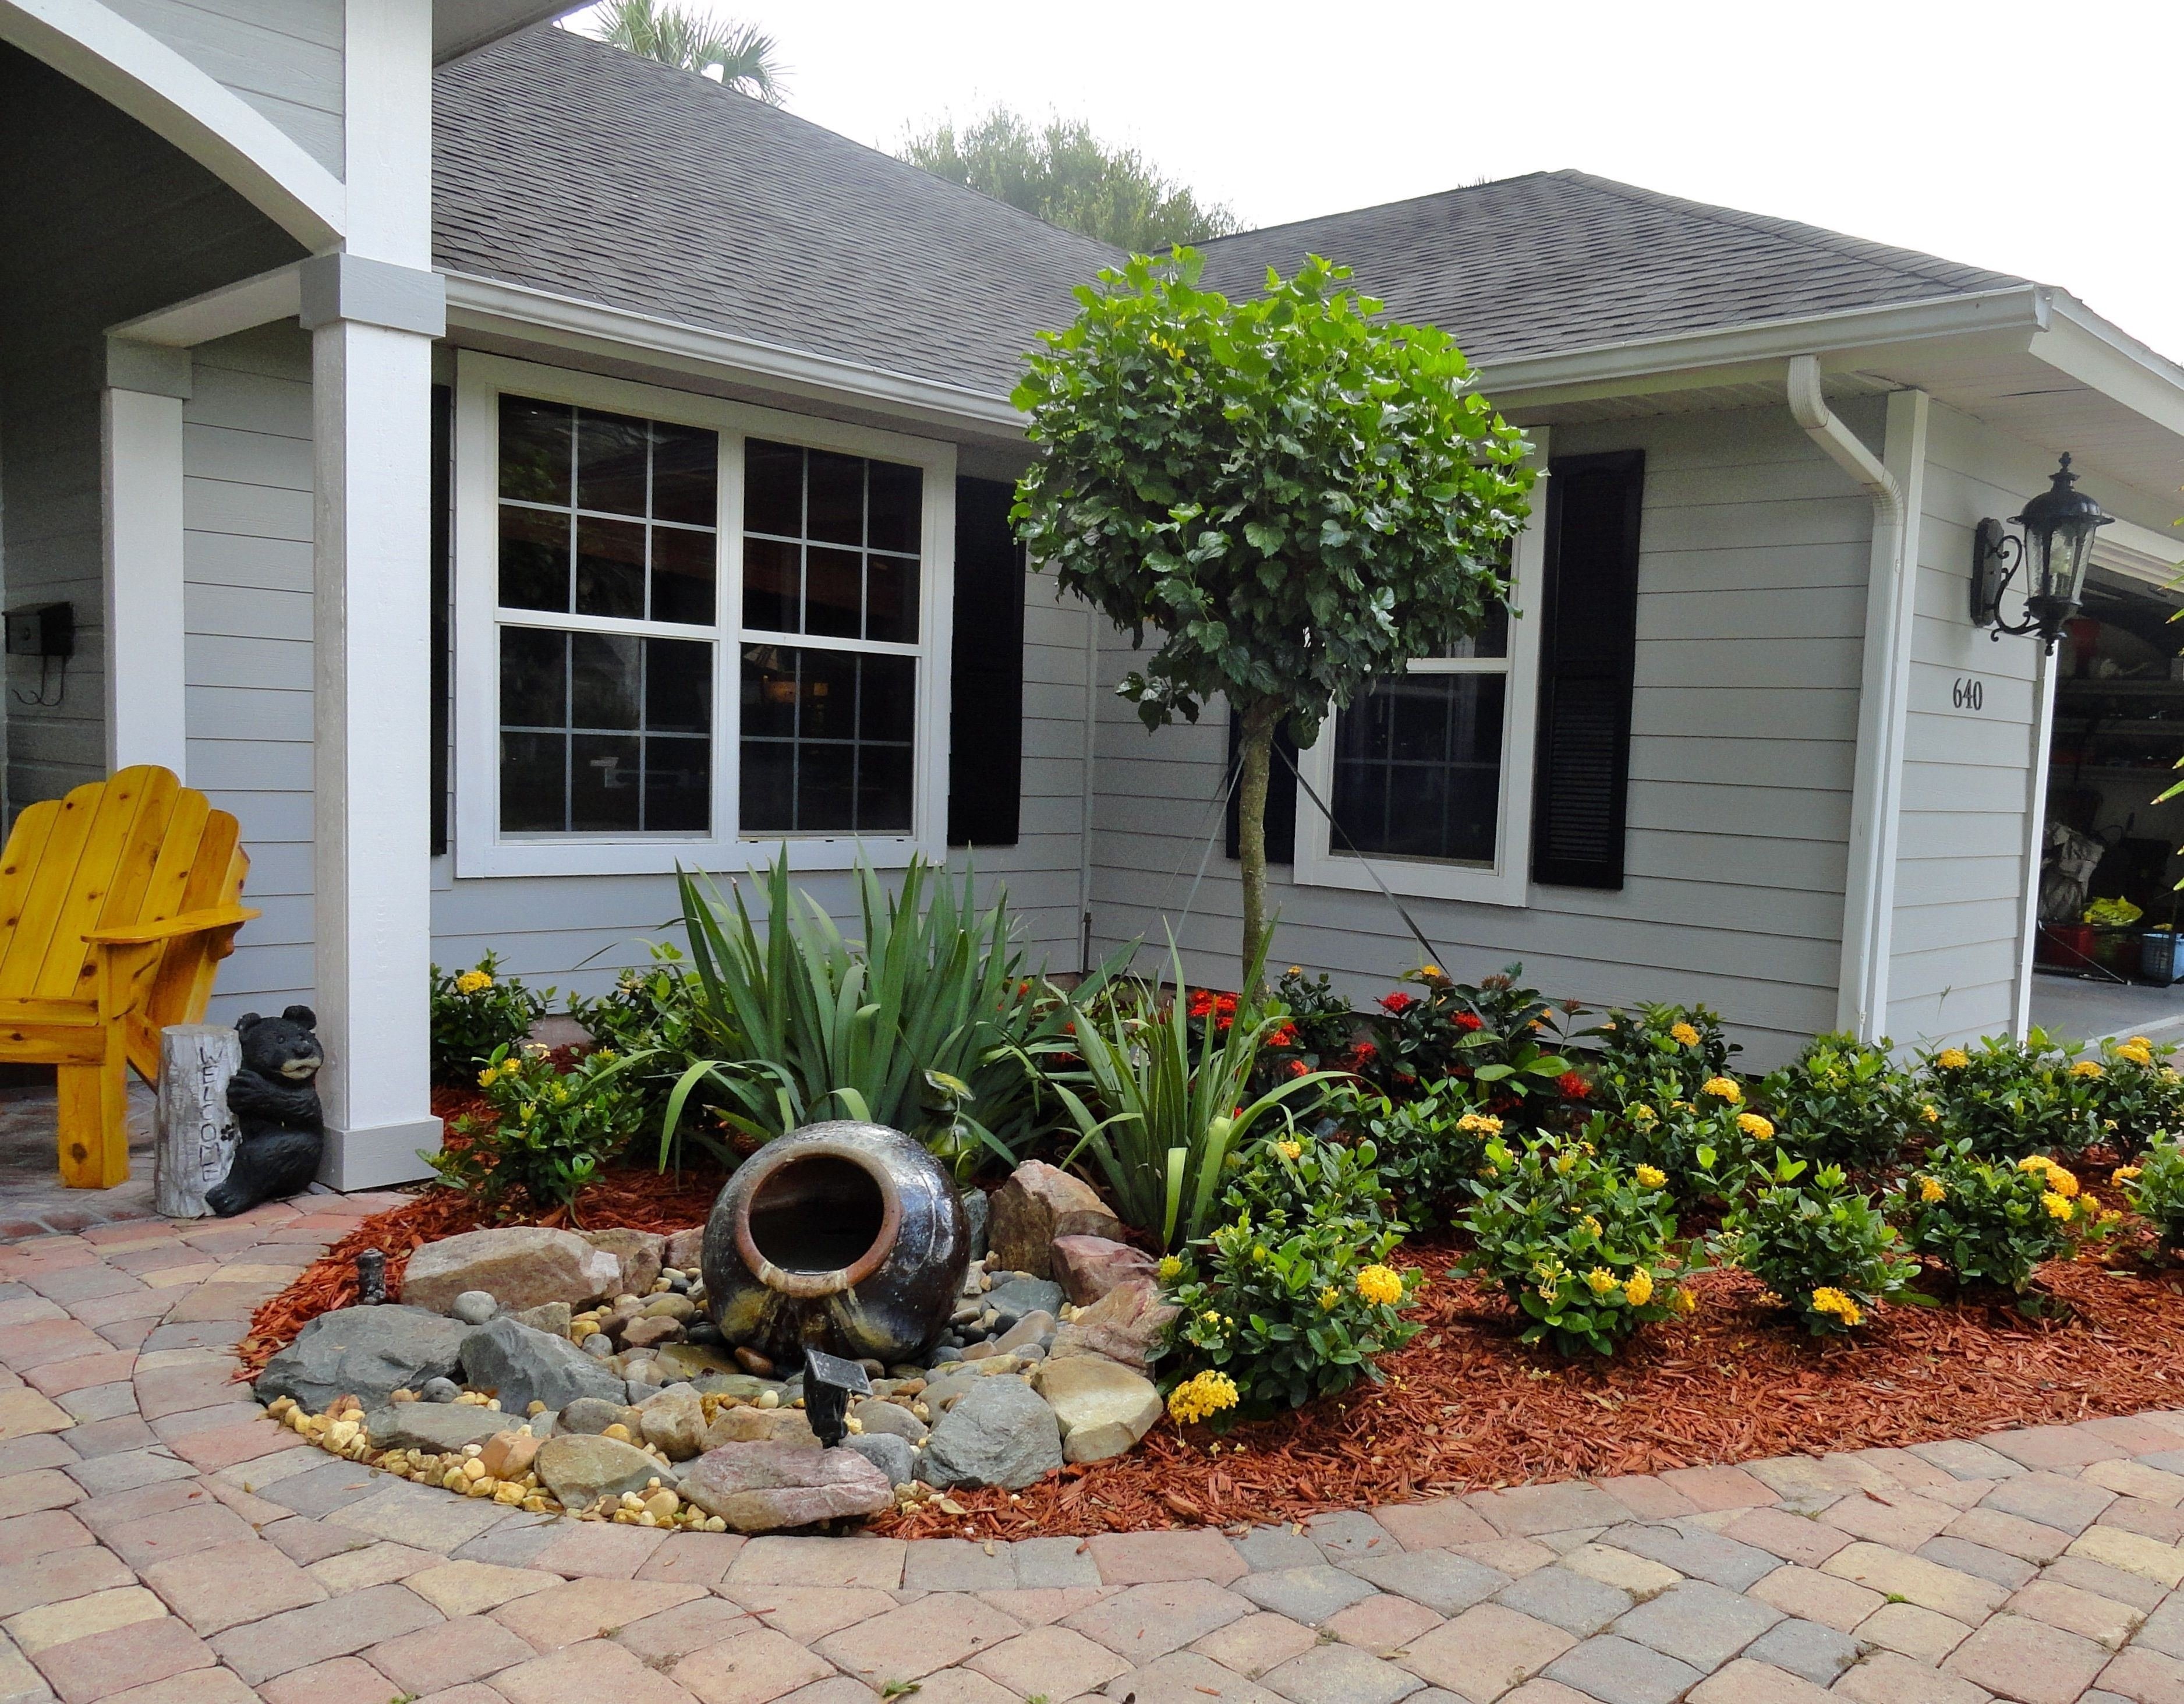 Landscape Ideas For Small Front Yard - Image to u